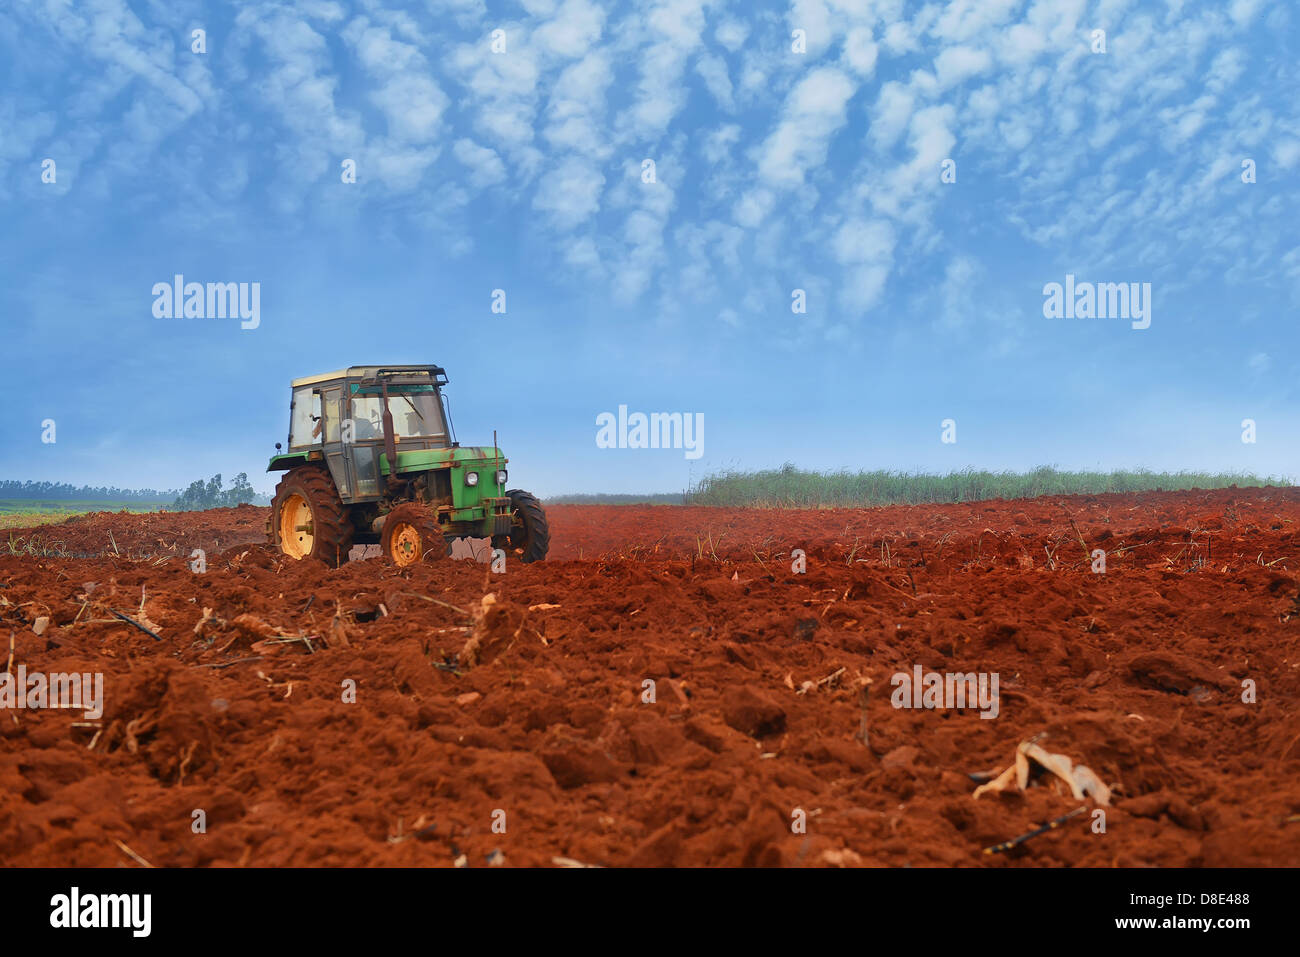 tractor cultivatin soil ready for seeding in spring Stock Photo